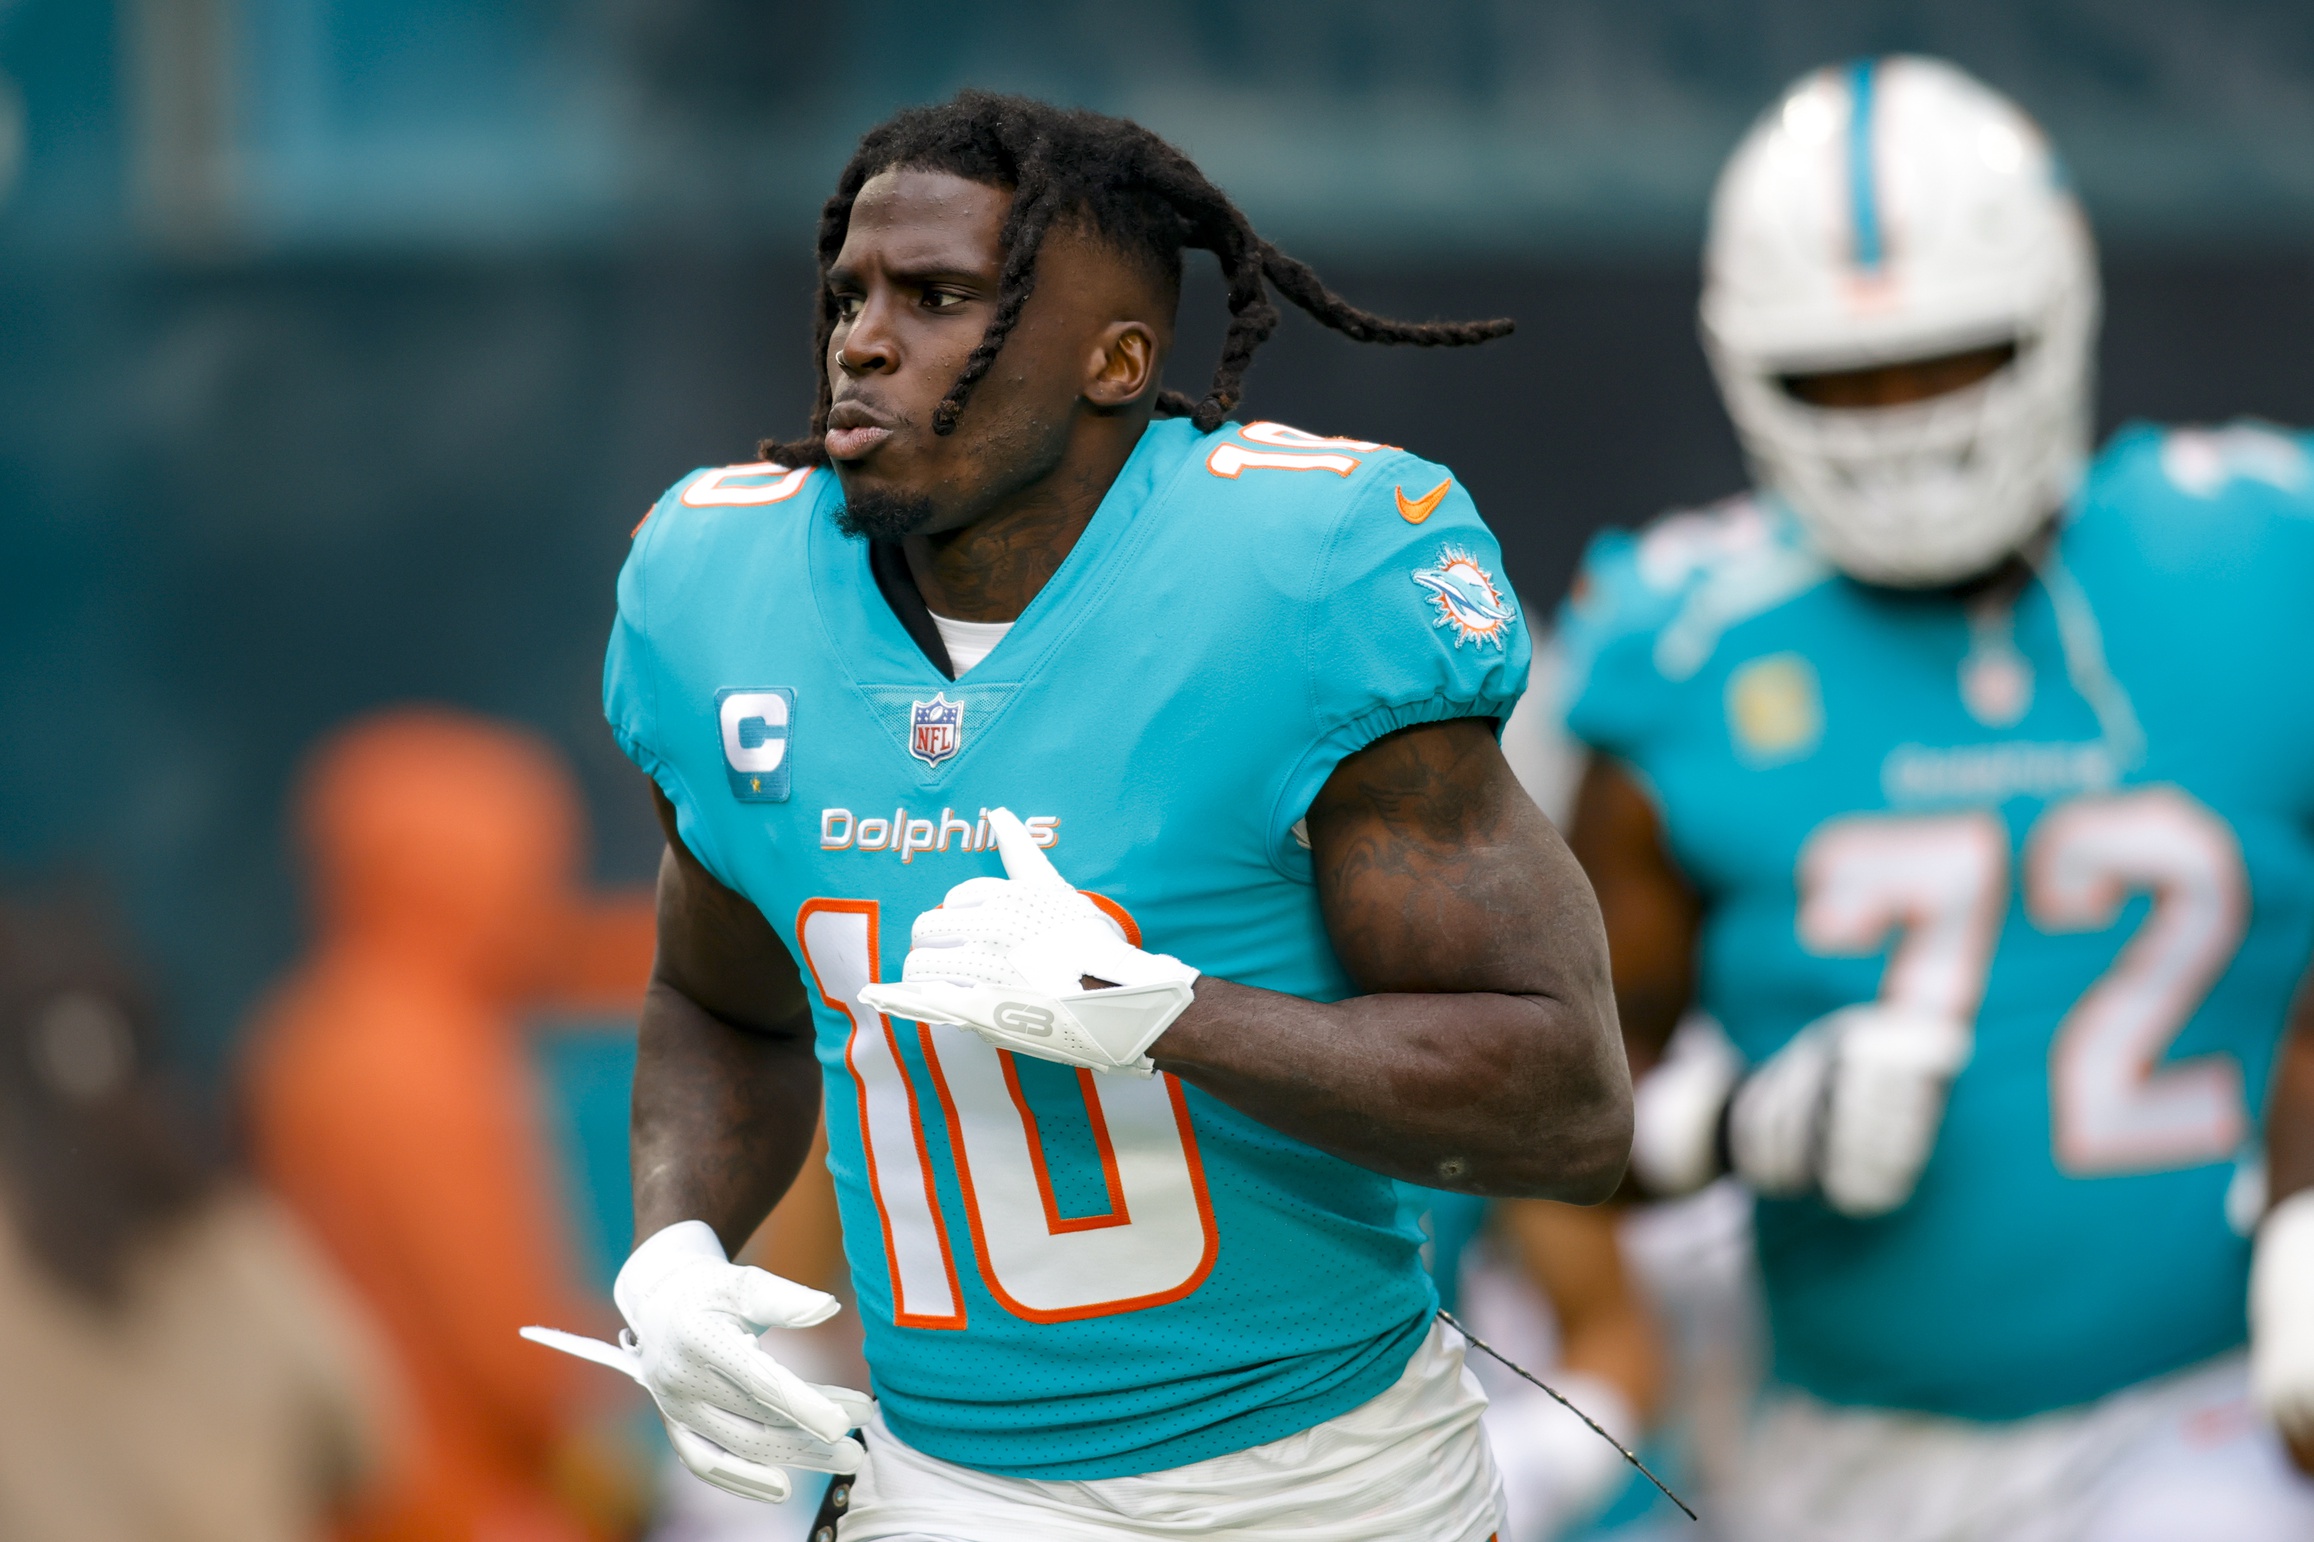 Tyreek Hill: Miami Dolphins trade for Kansas City Chiefs star receiver, who  is set to sign new record contract, NFL News